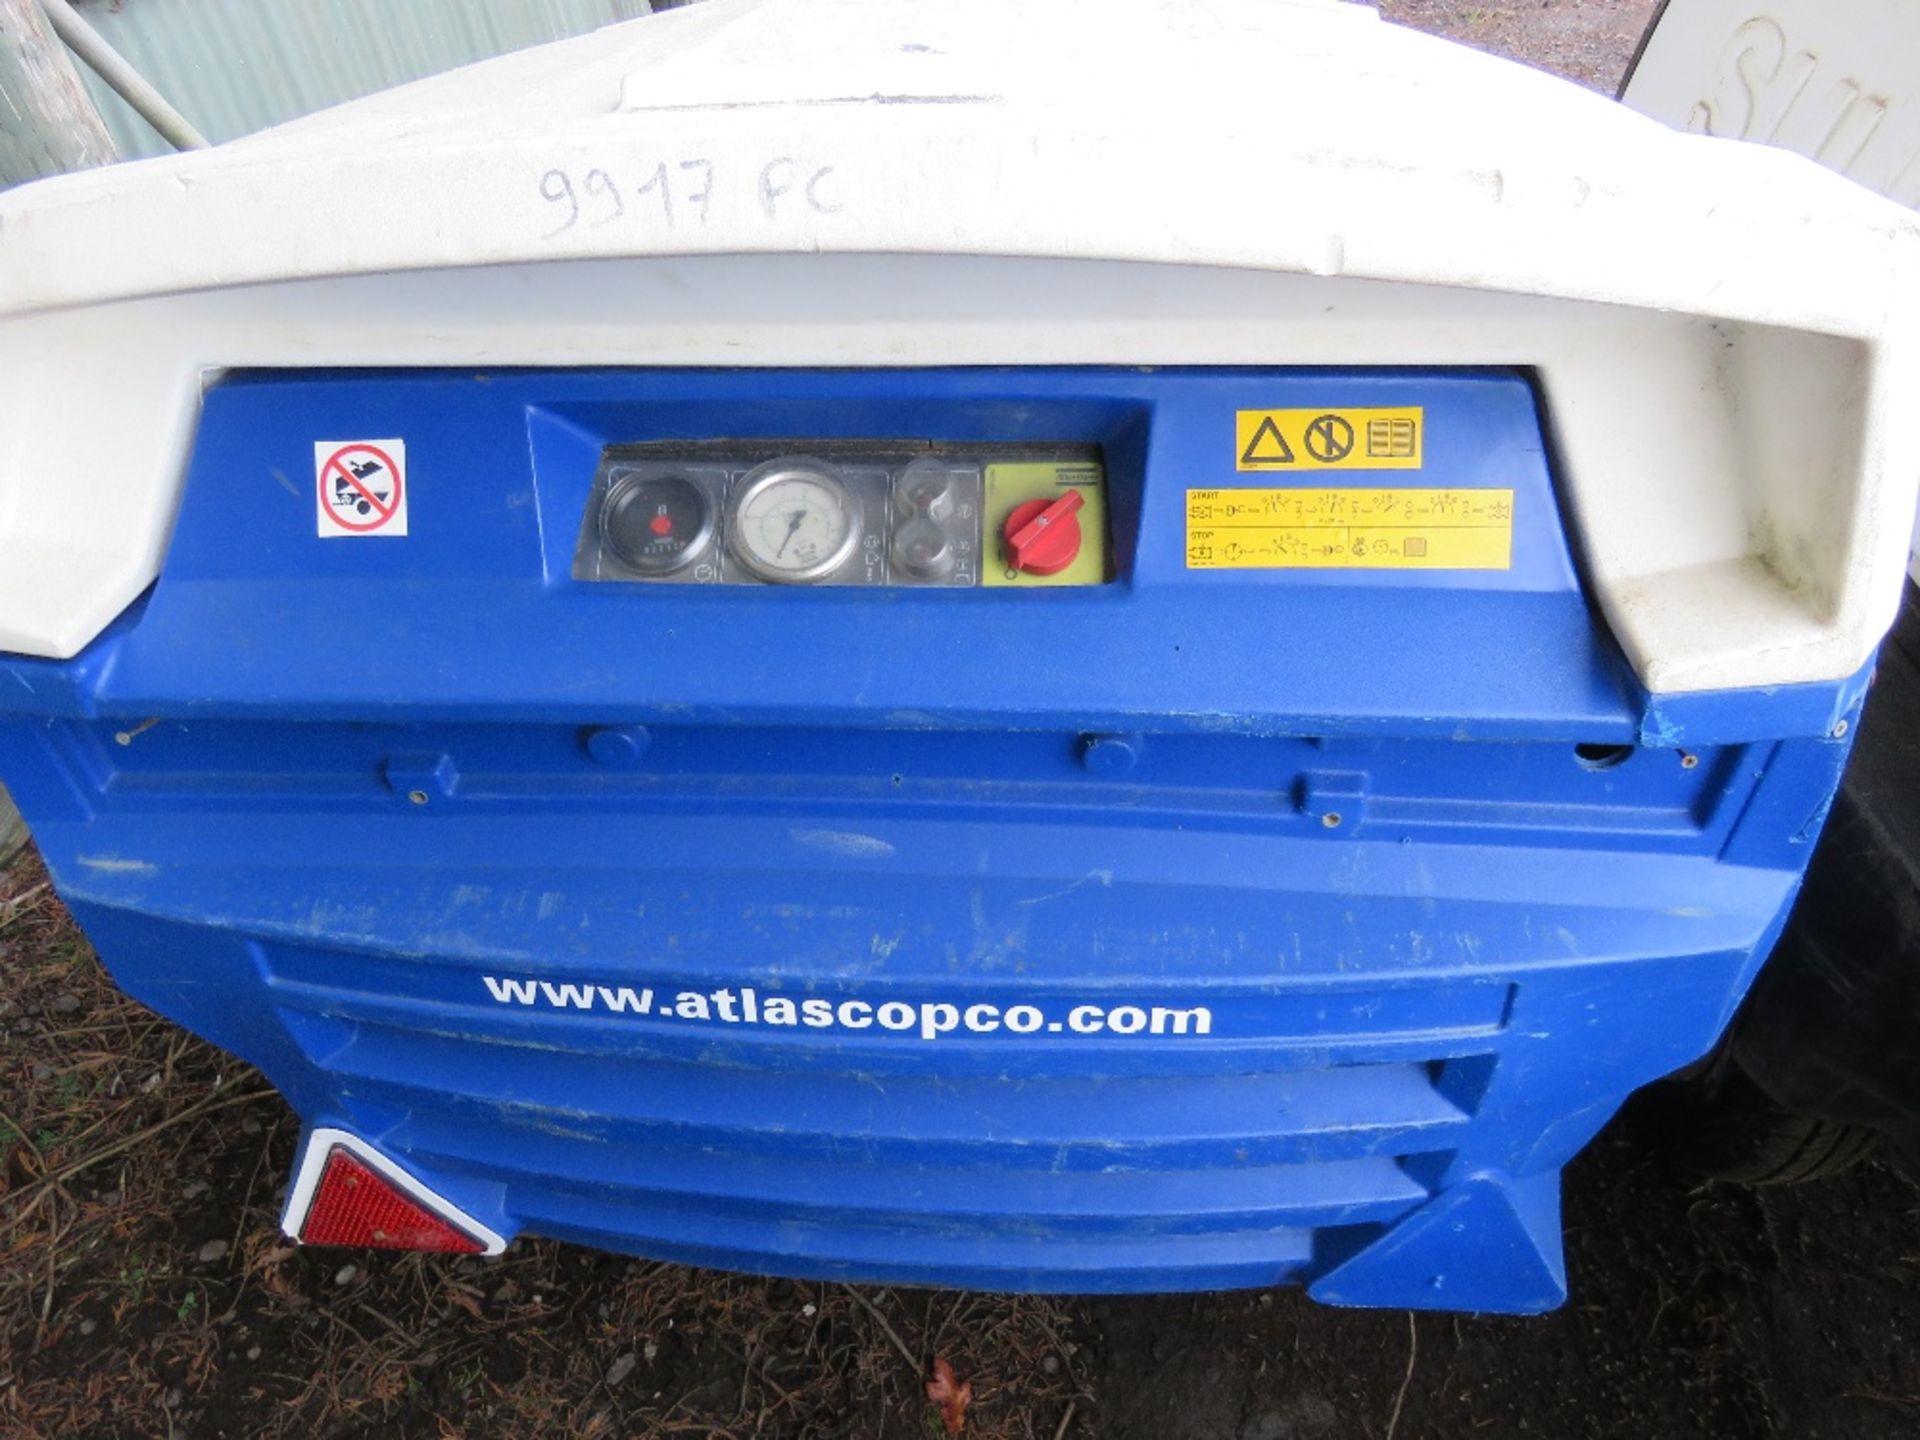 ATLAS COPCO XAS47 COMPRESSOR YEAR 2013. 239 REC HRS (UNVERIFIED) SN:0309223. - Image 2 of 7